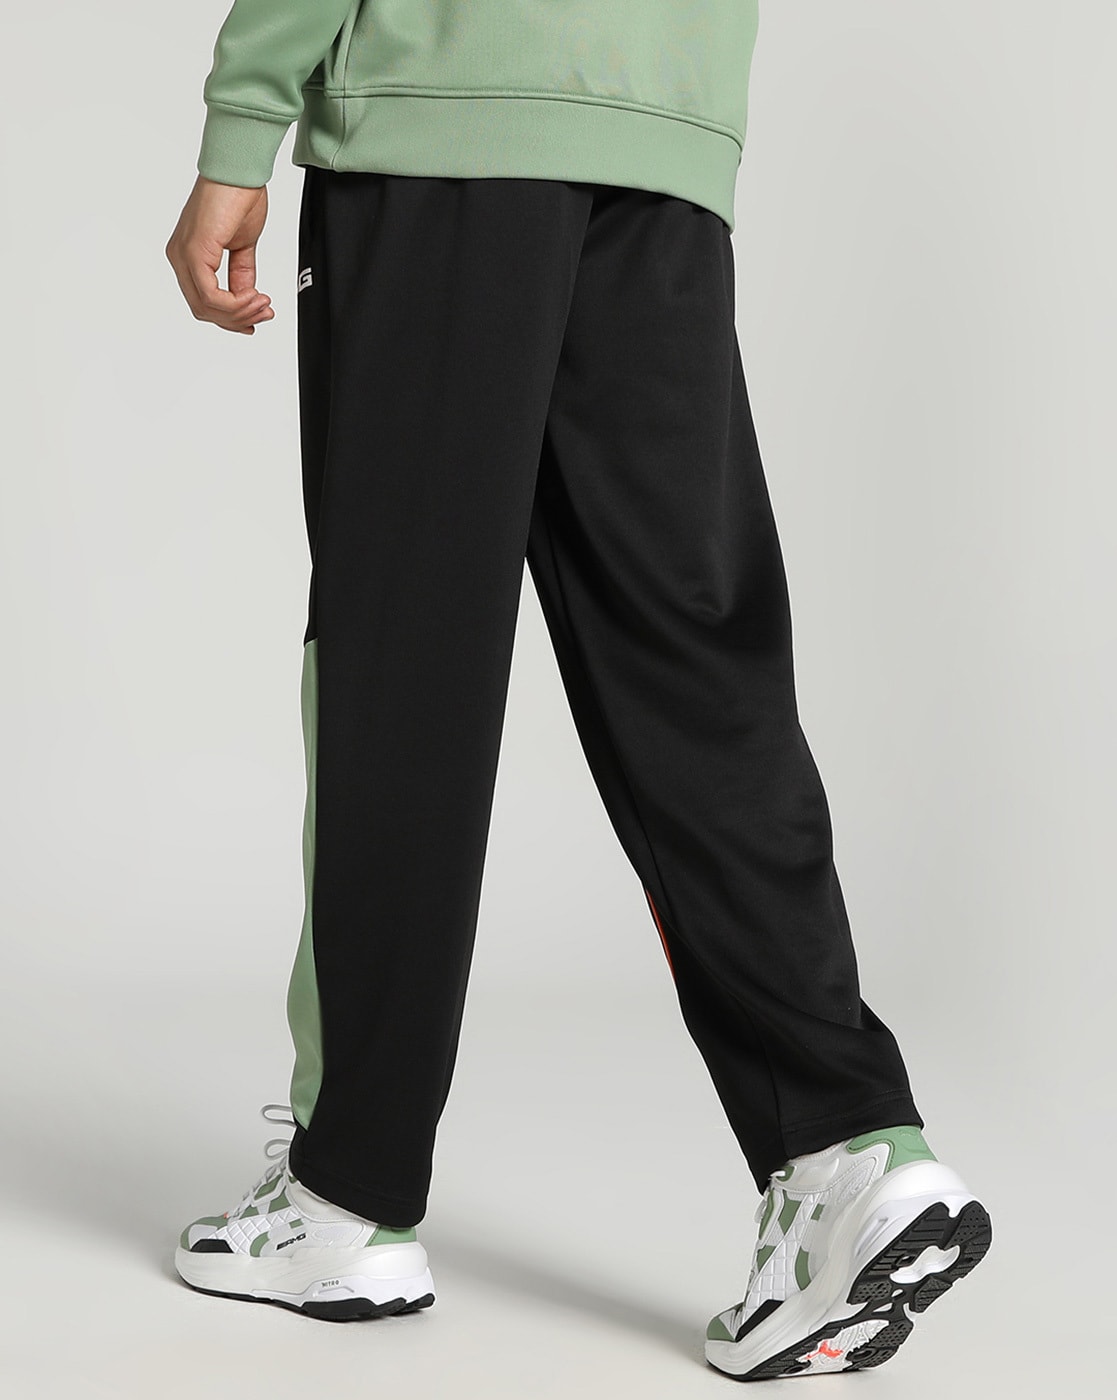 Buy Green Track Pants for Women by Dollar Online | Ajio.com